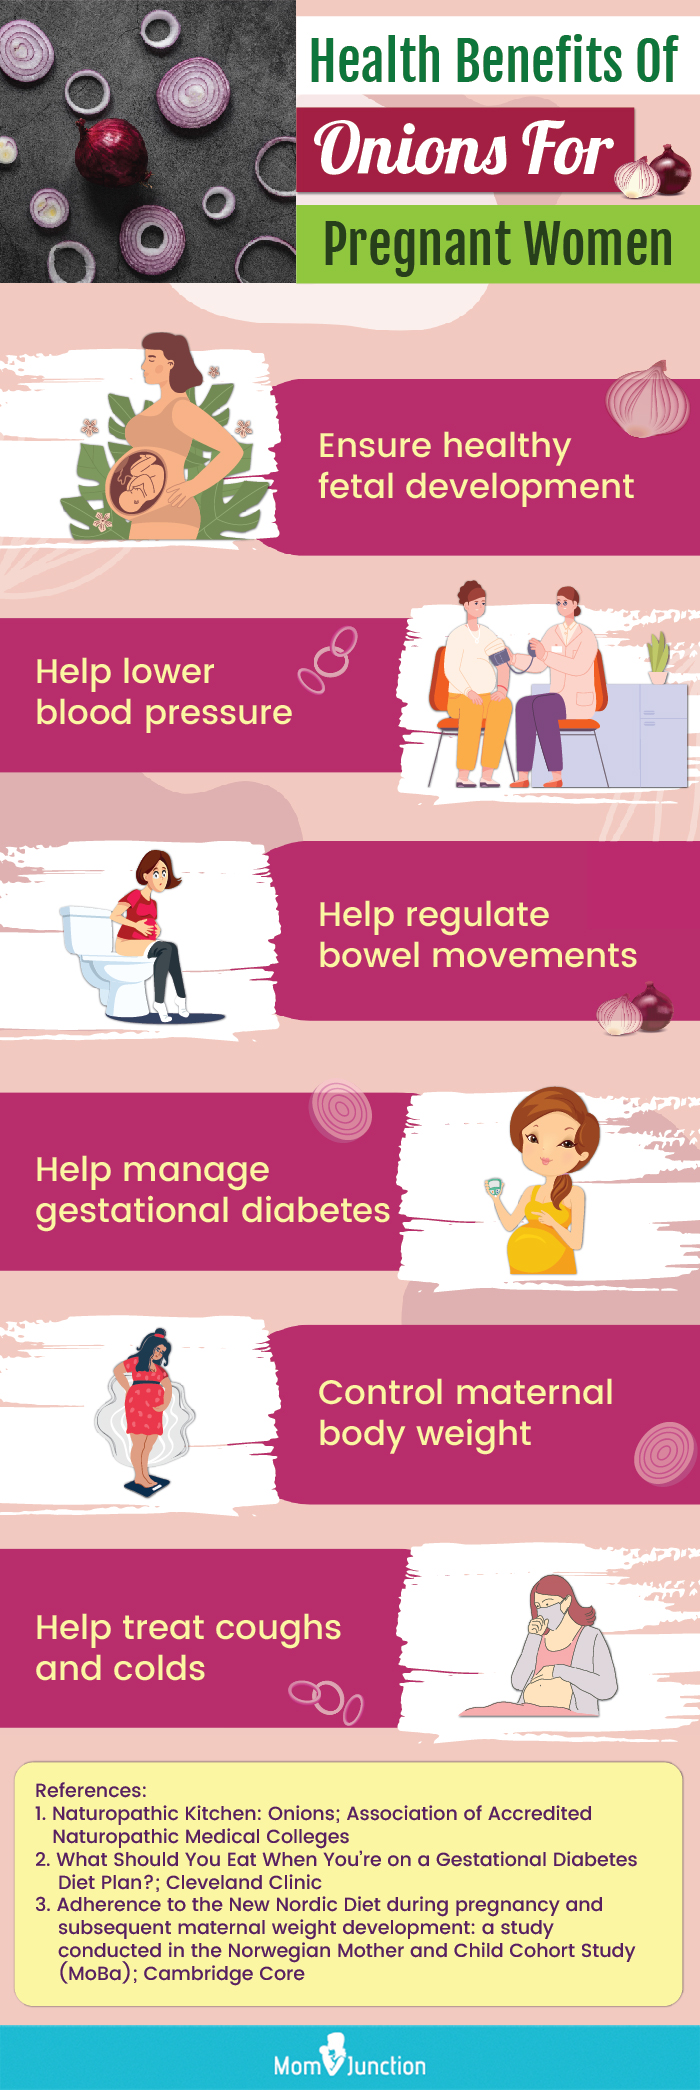 benefits of eating onions for pregnant women (infographic)